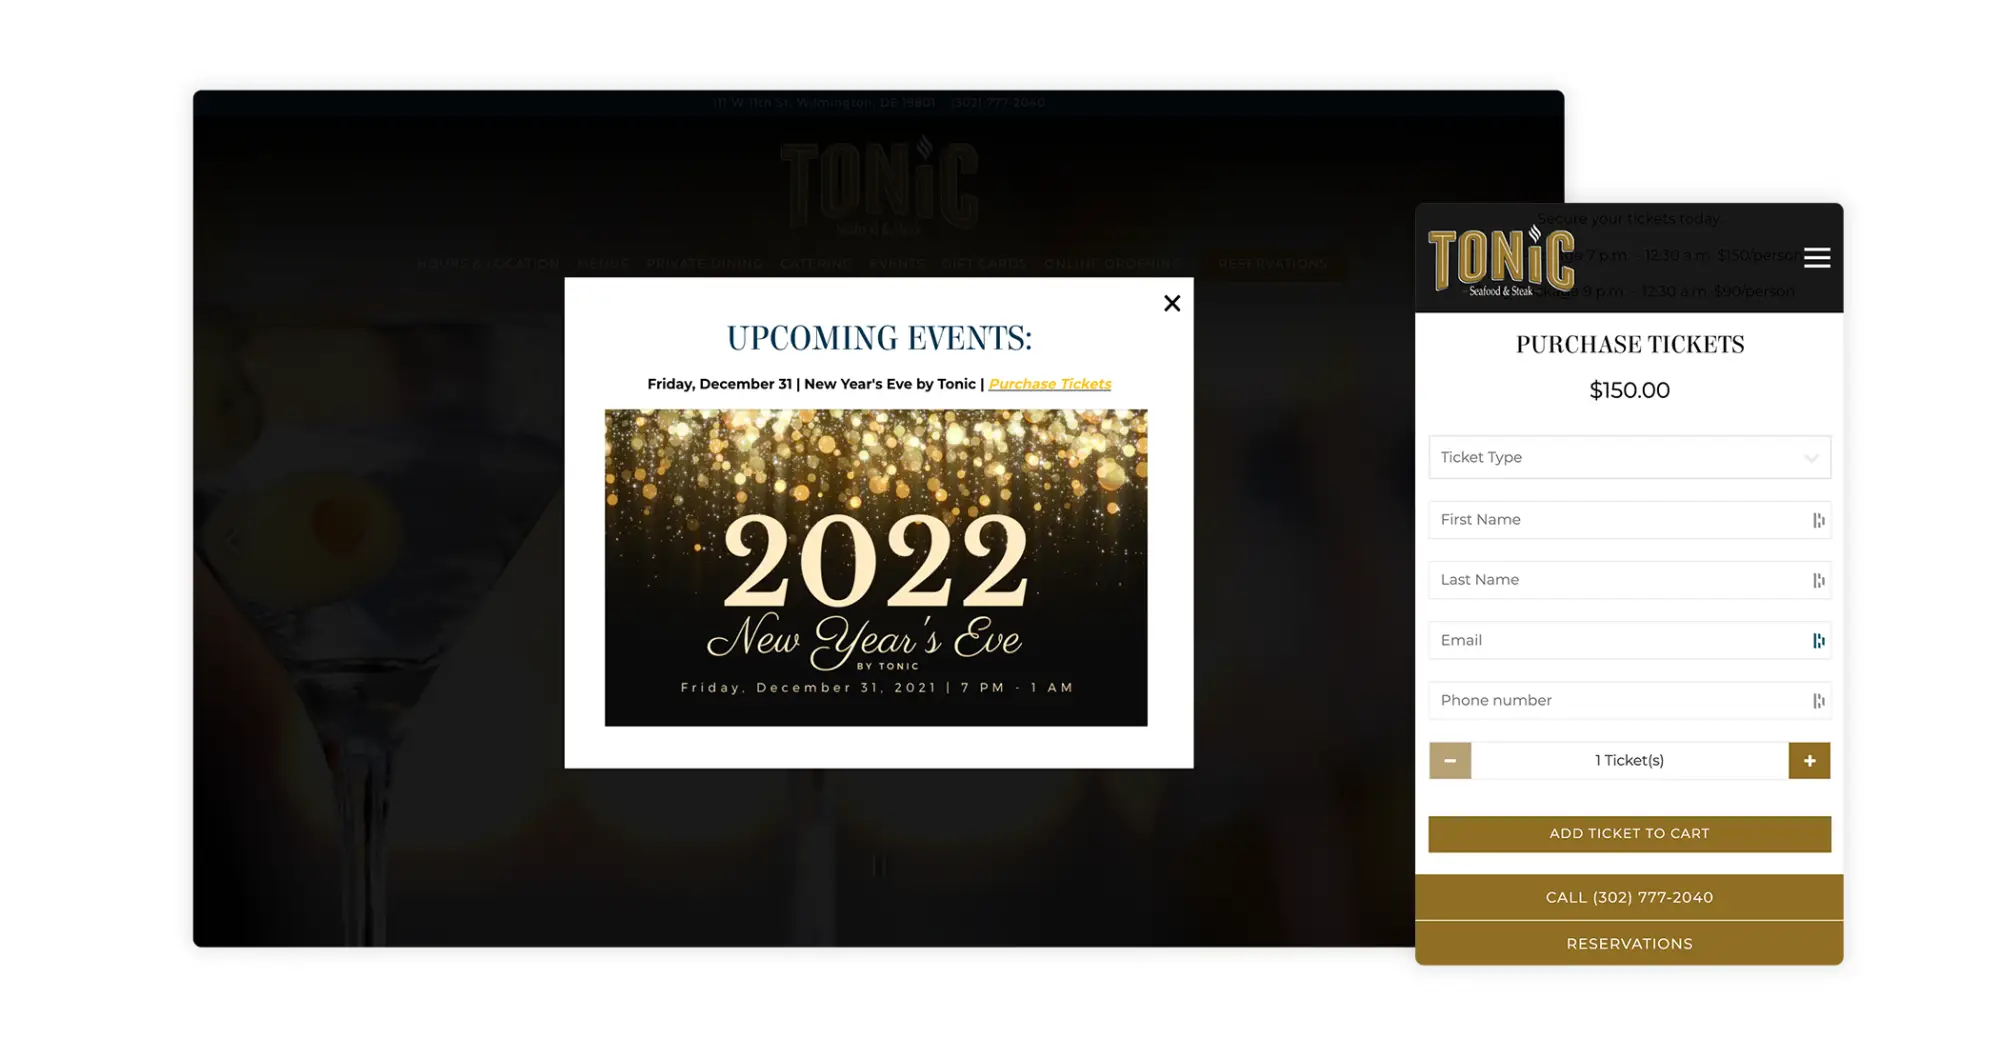 Tonic Seafood and Steak promotes its New Year’s Eve ticketed event using pop-up alertsal user interface, website